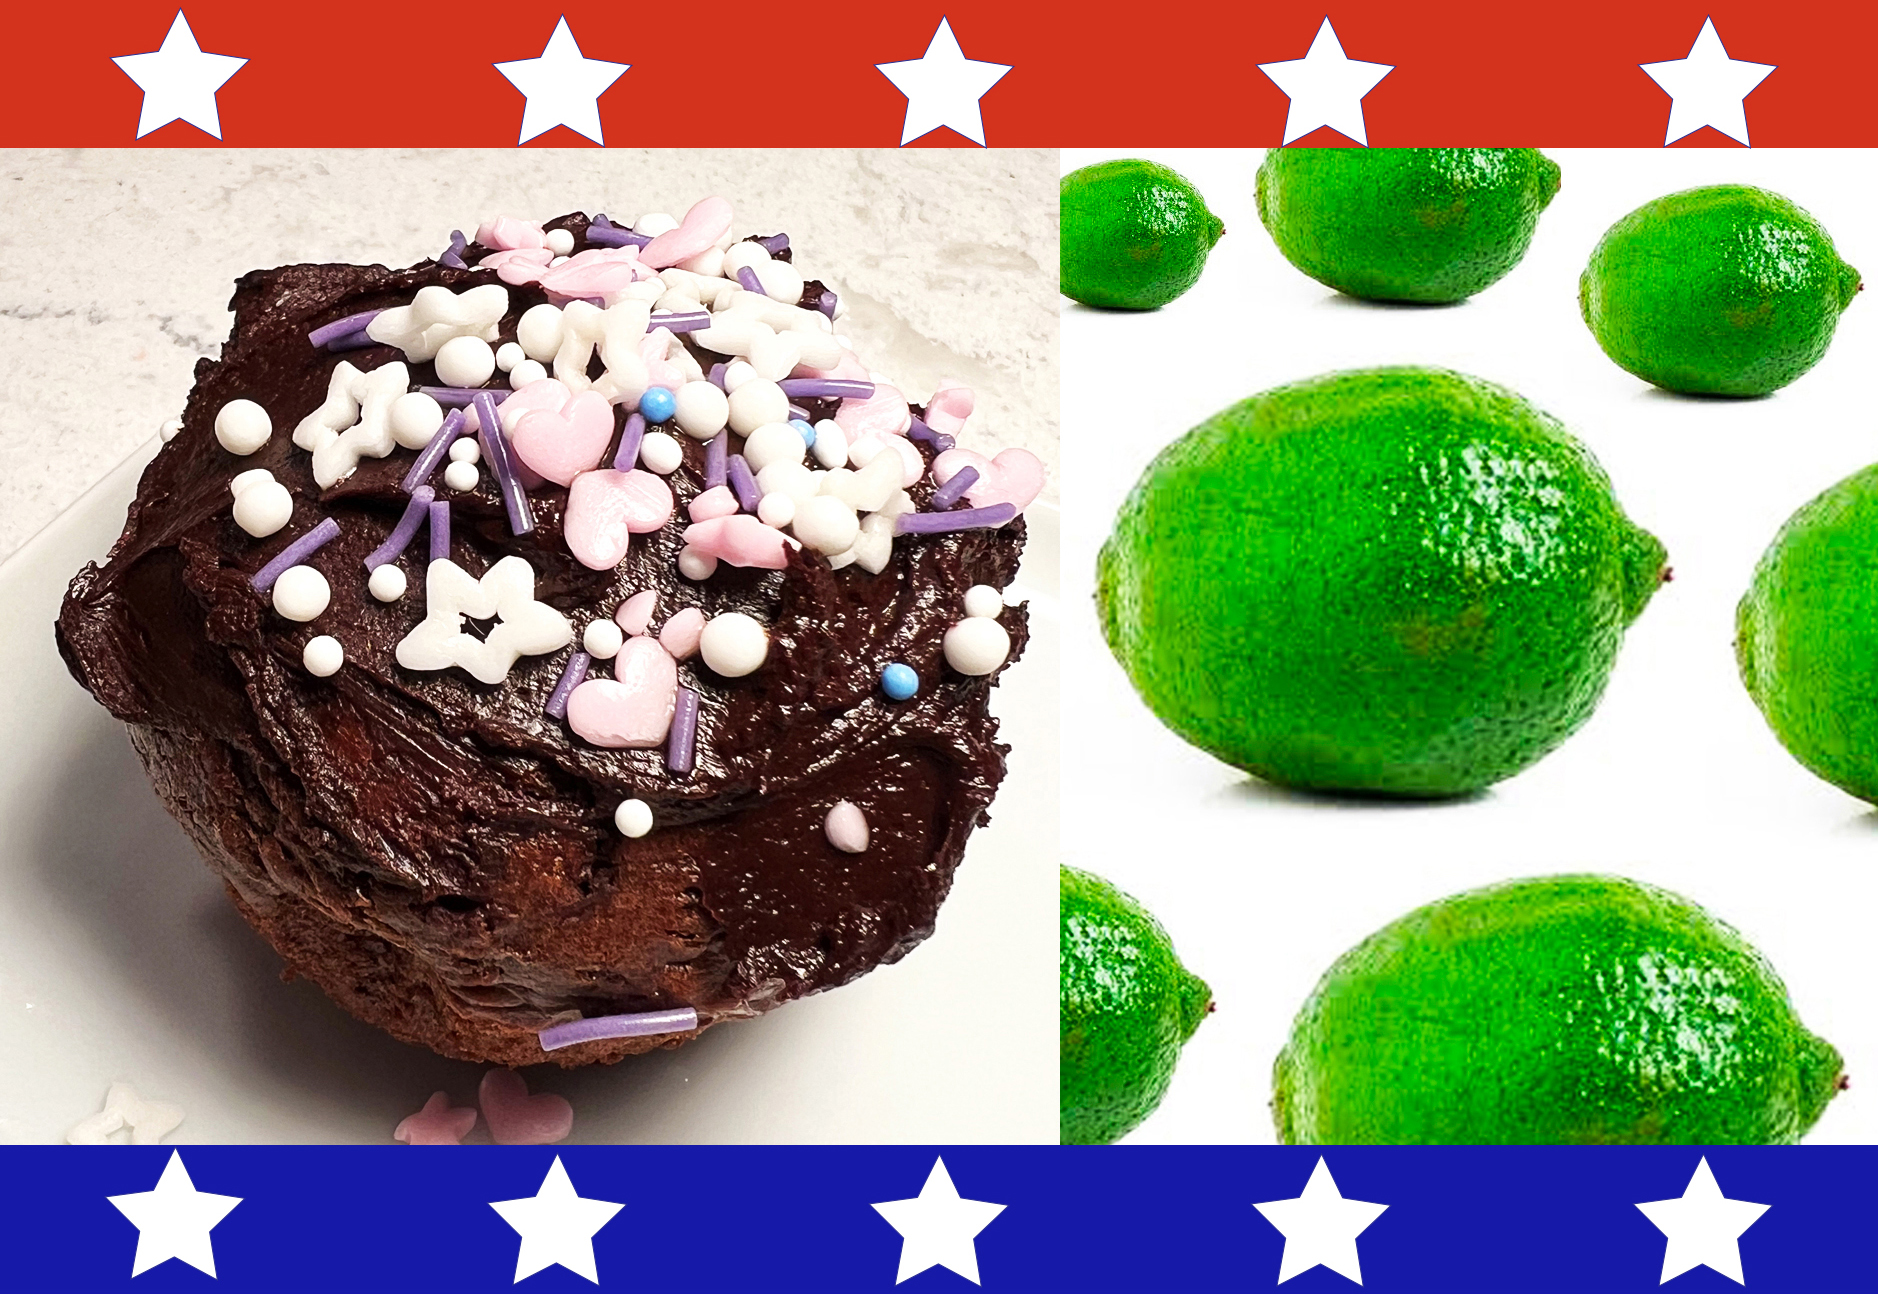 ELECTION DAY Bake-Off for Kids!